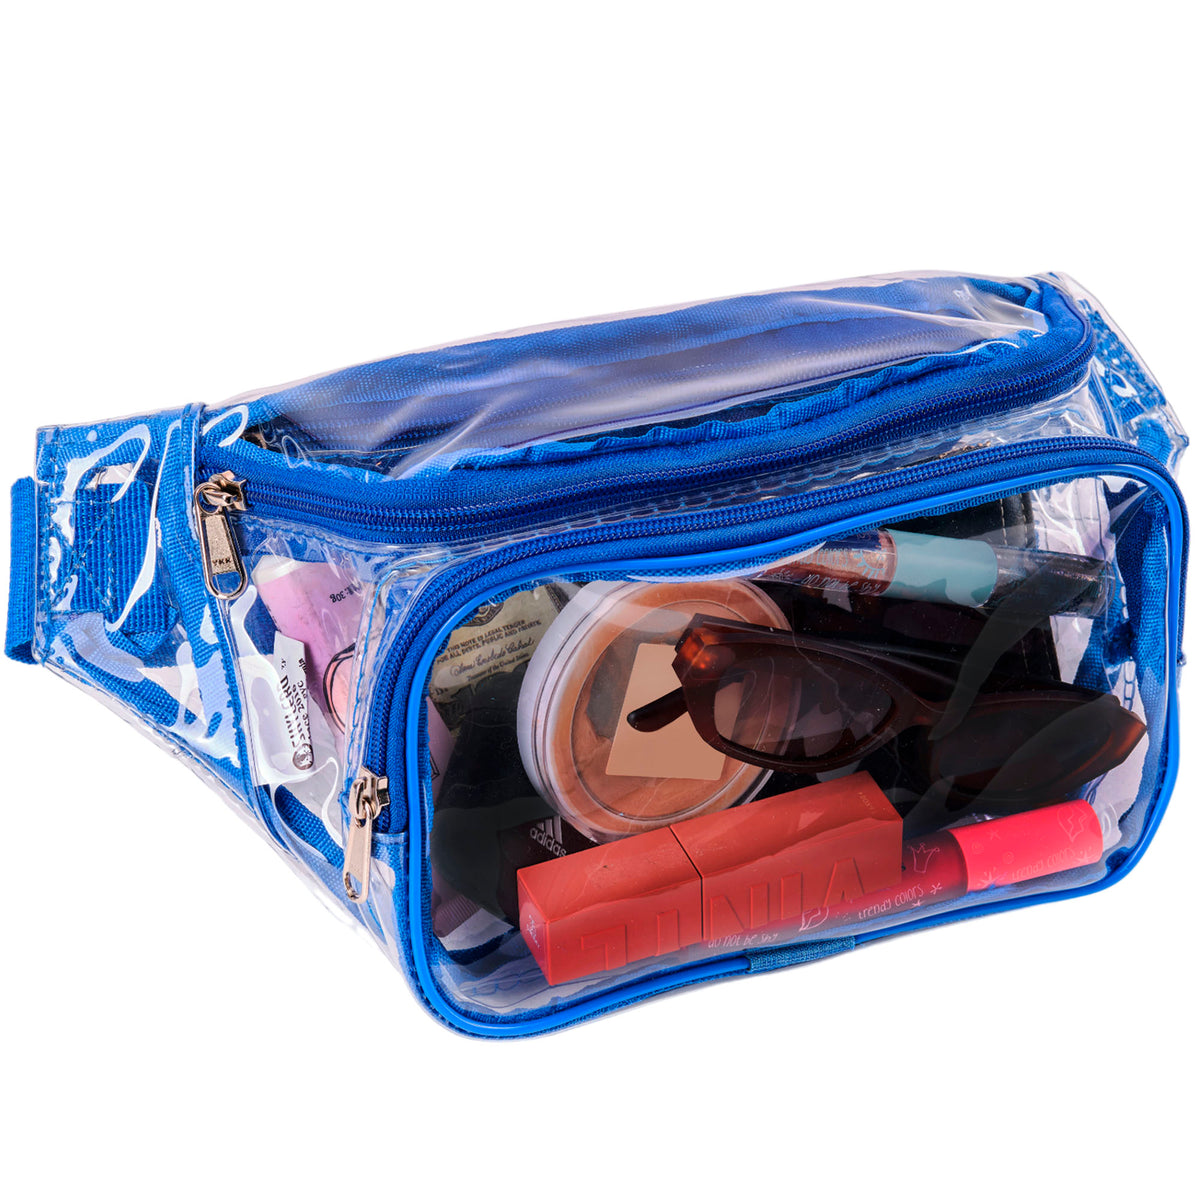 Clear Fanny Pack Stadium Approved | Top YKK® Zip | XL Size Friendly | 11’x5.9’x3.6’ | Blue